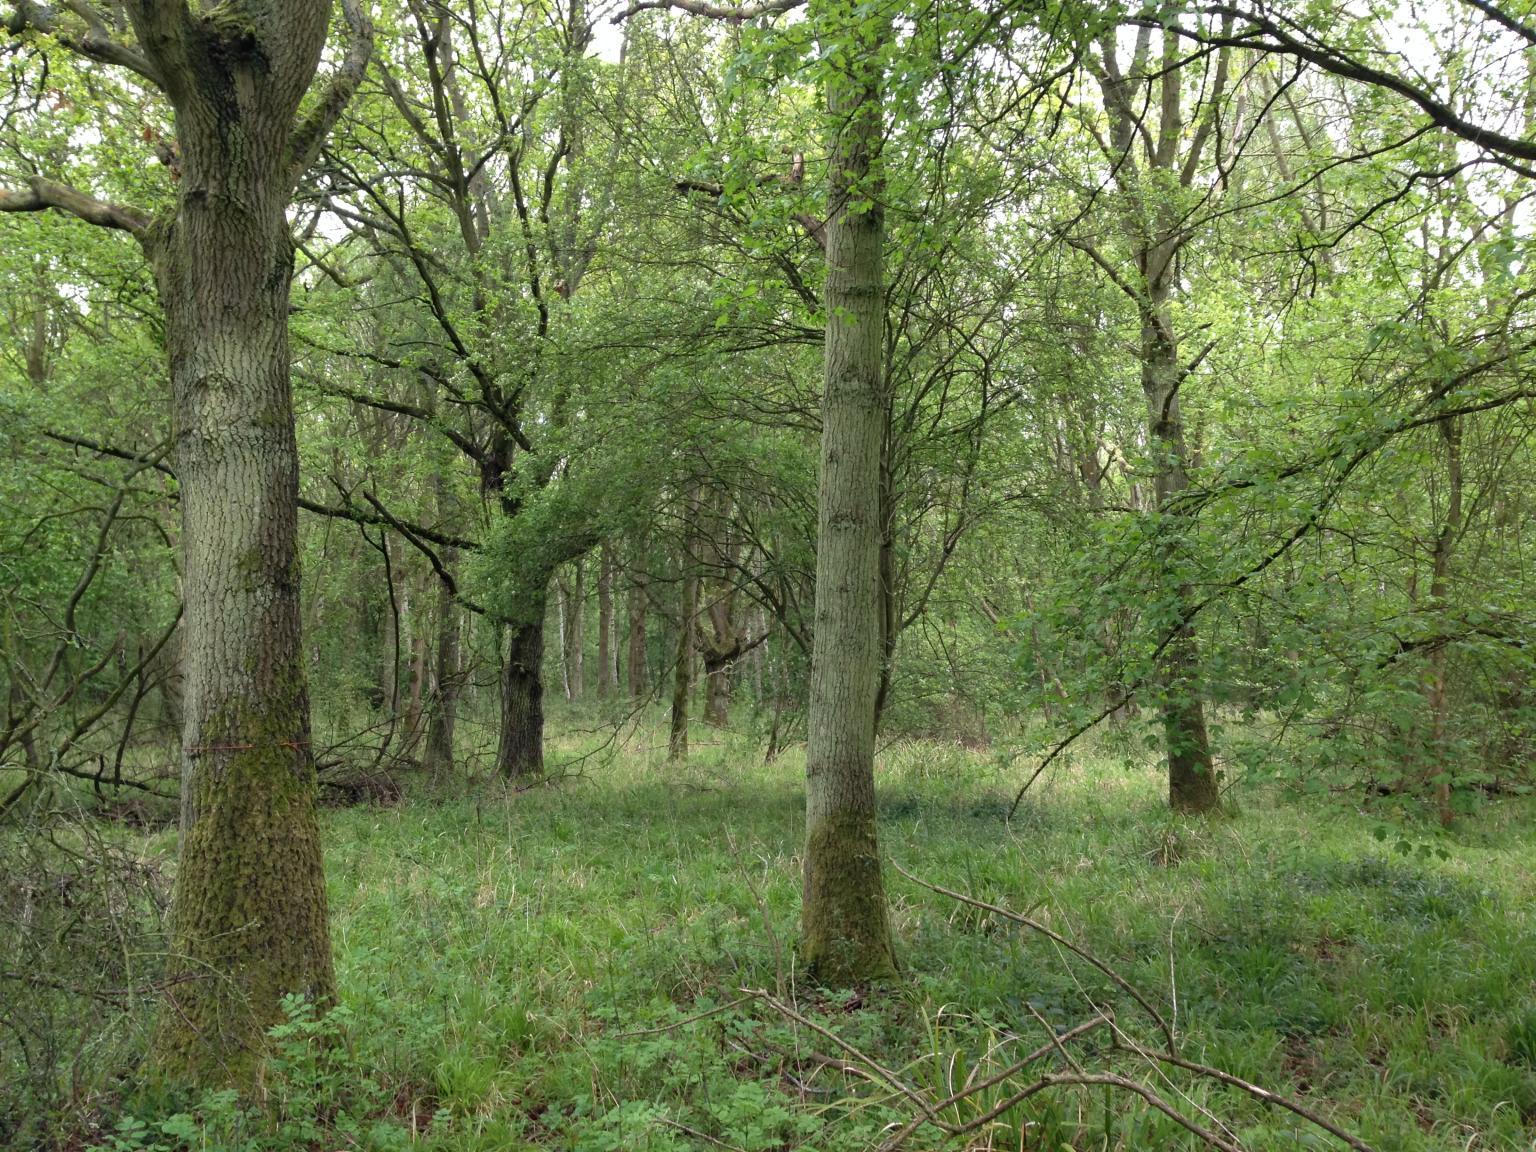 Rewilding at Monks Wood site after 59 years